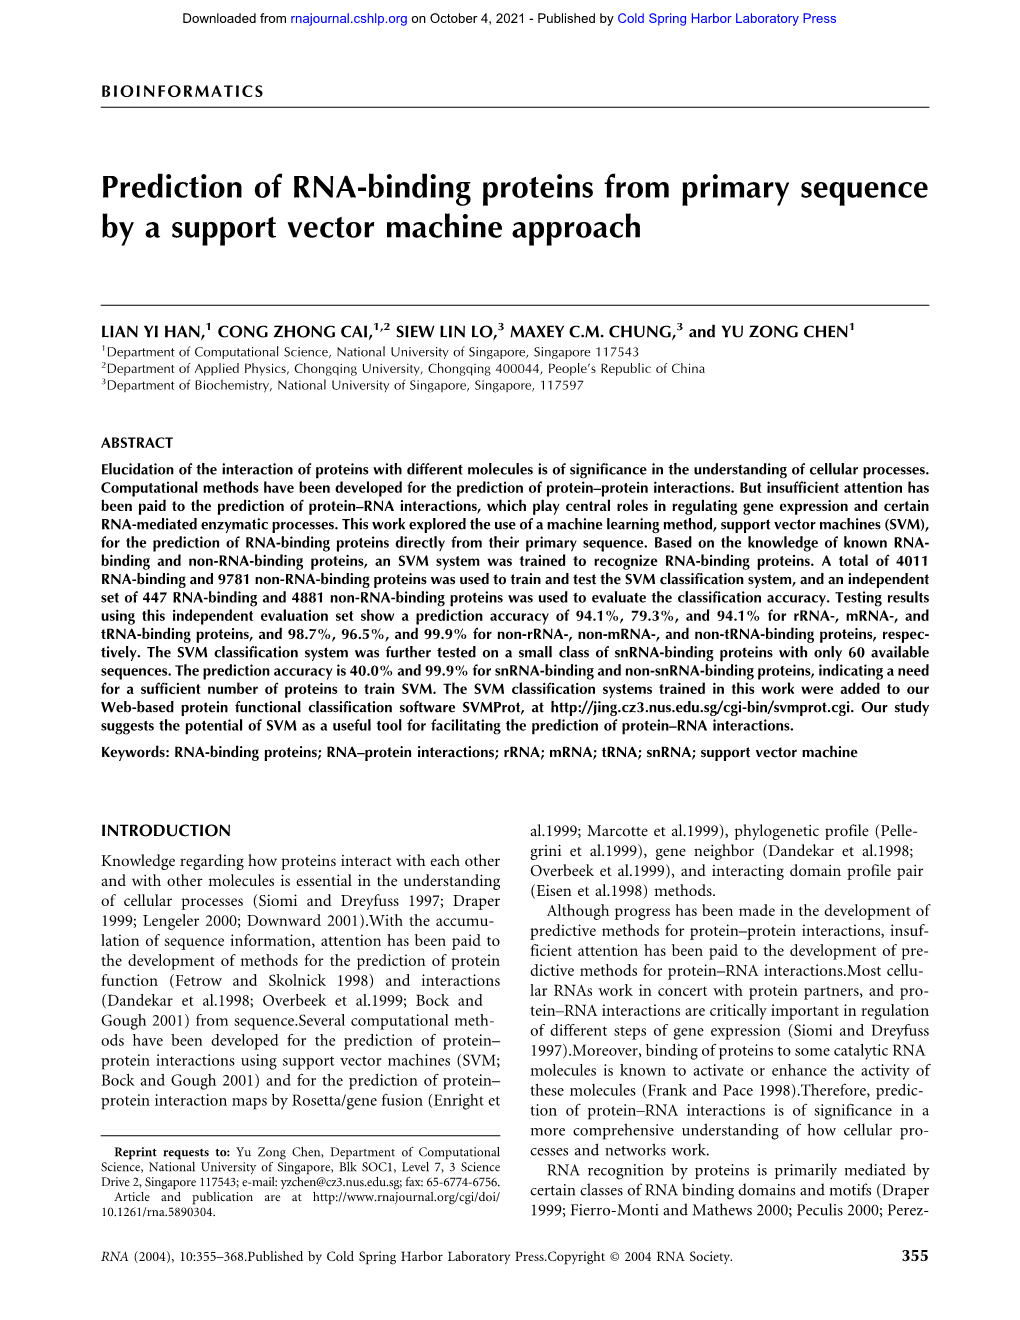 Prediction of RNA-Binding Proteins from Primary Sequence by a Support Vector Machine Approach